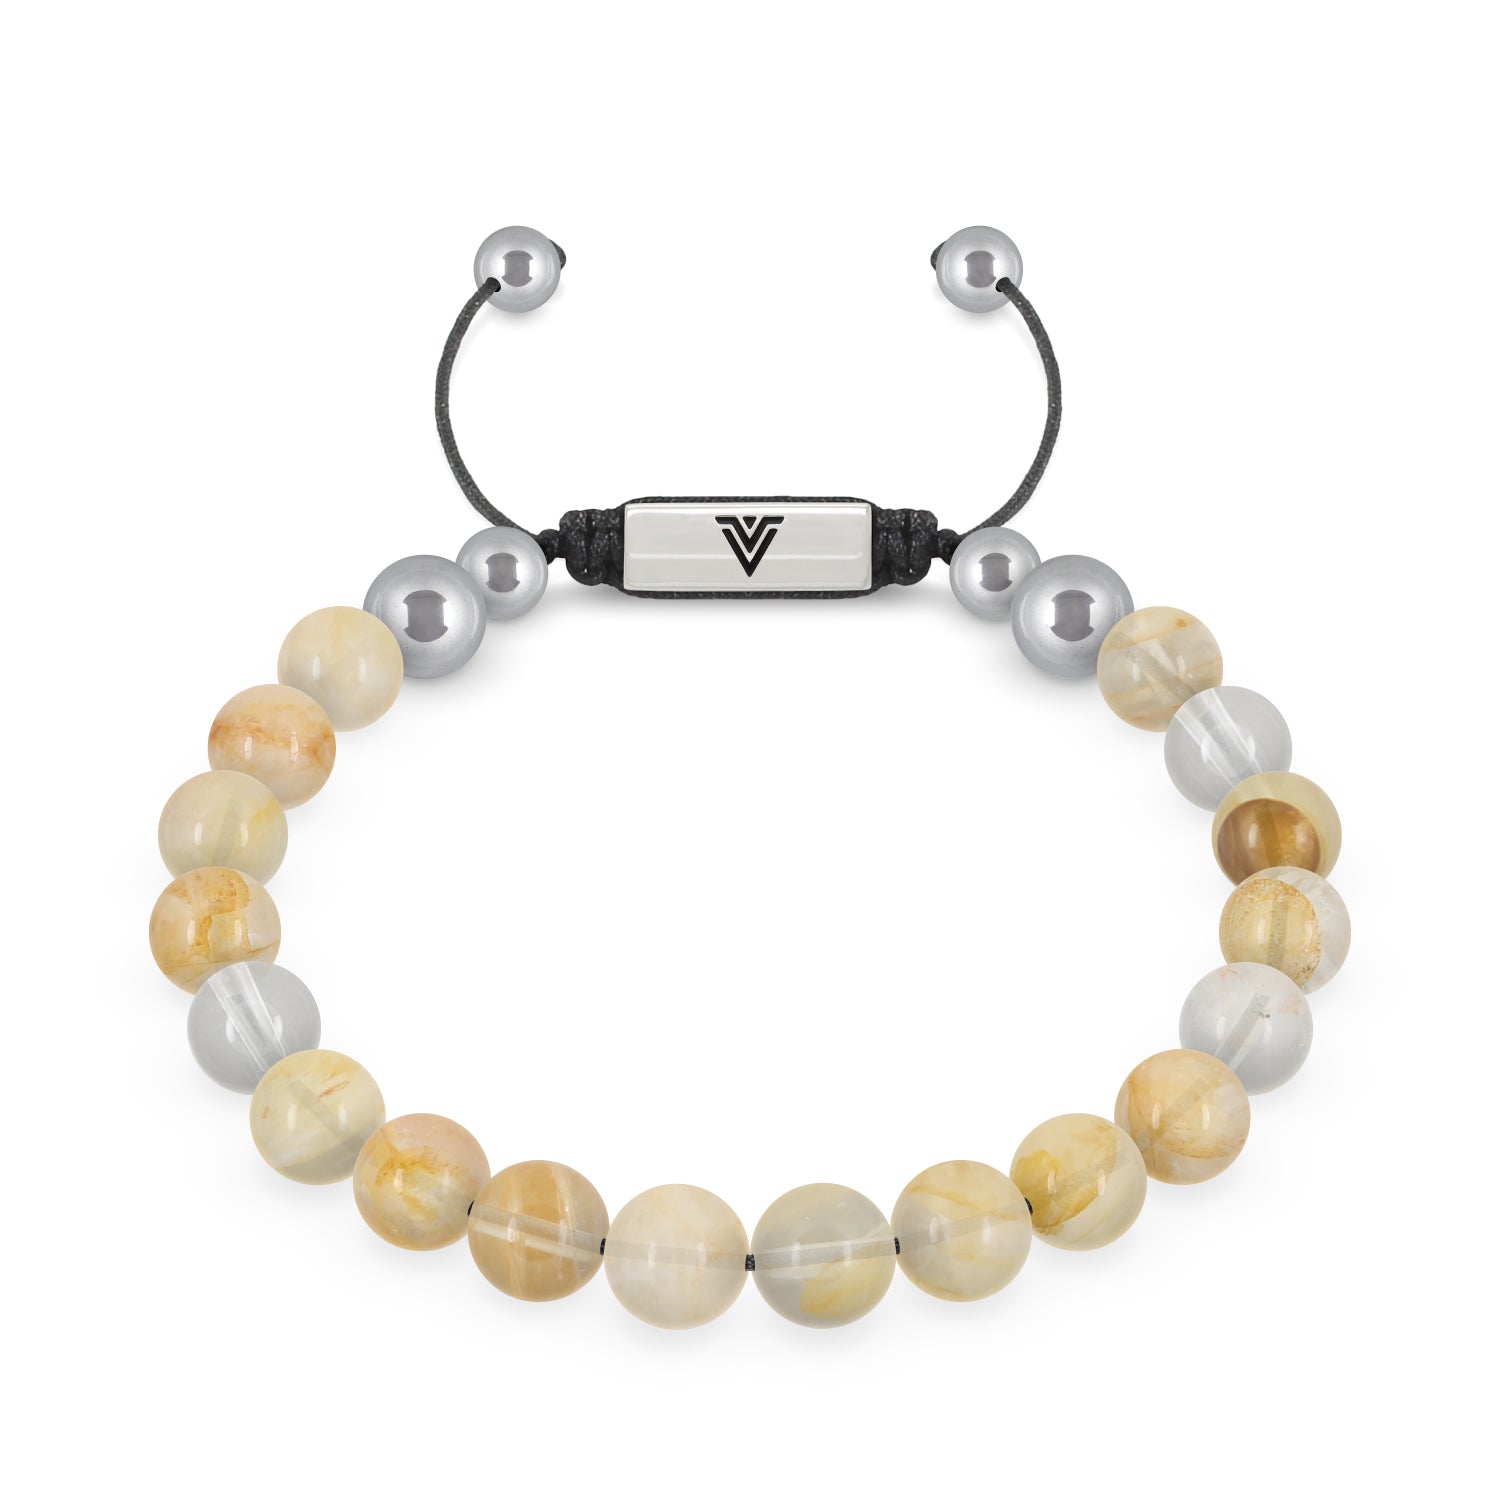 Front view of an 8mm Citrine beaded shamballa bracelet with silver stainless steel logo bead made by Voltlin